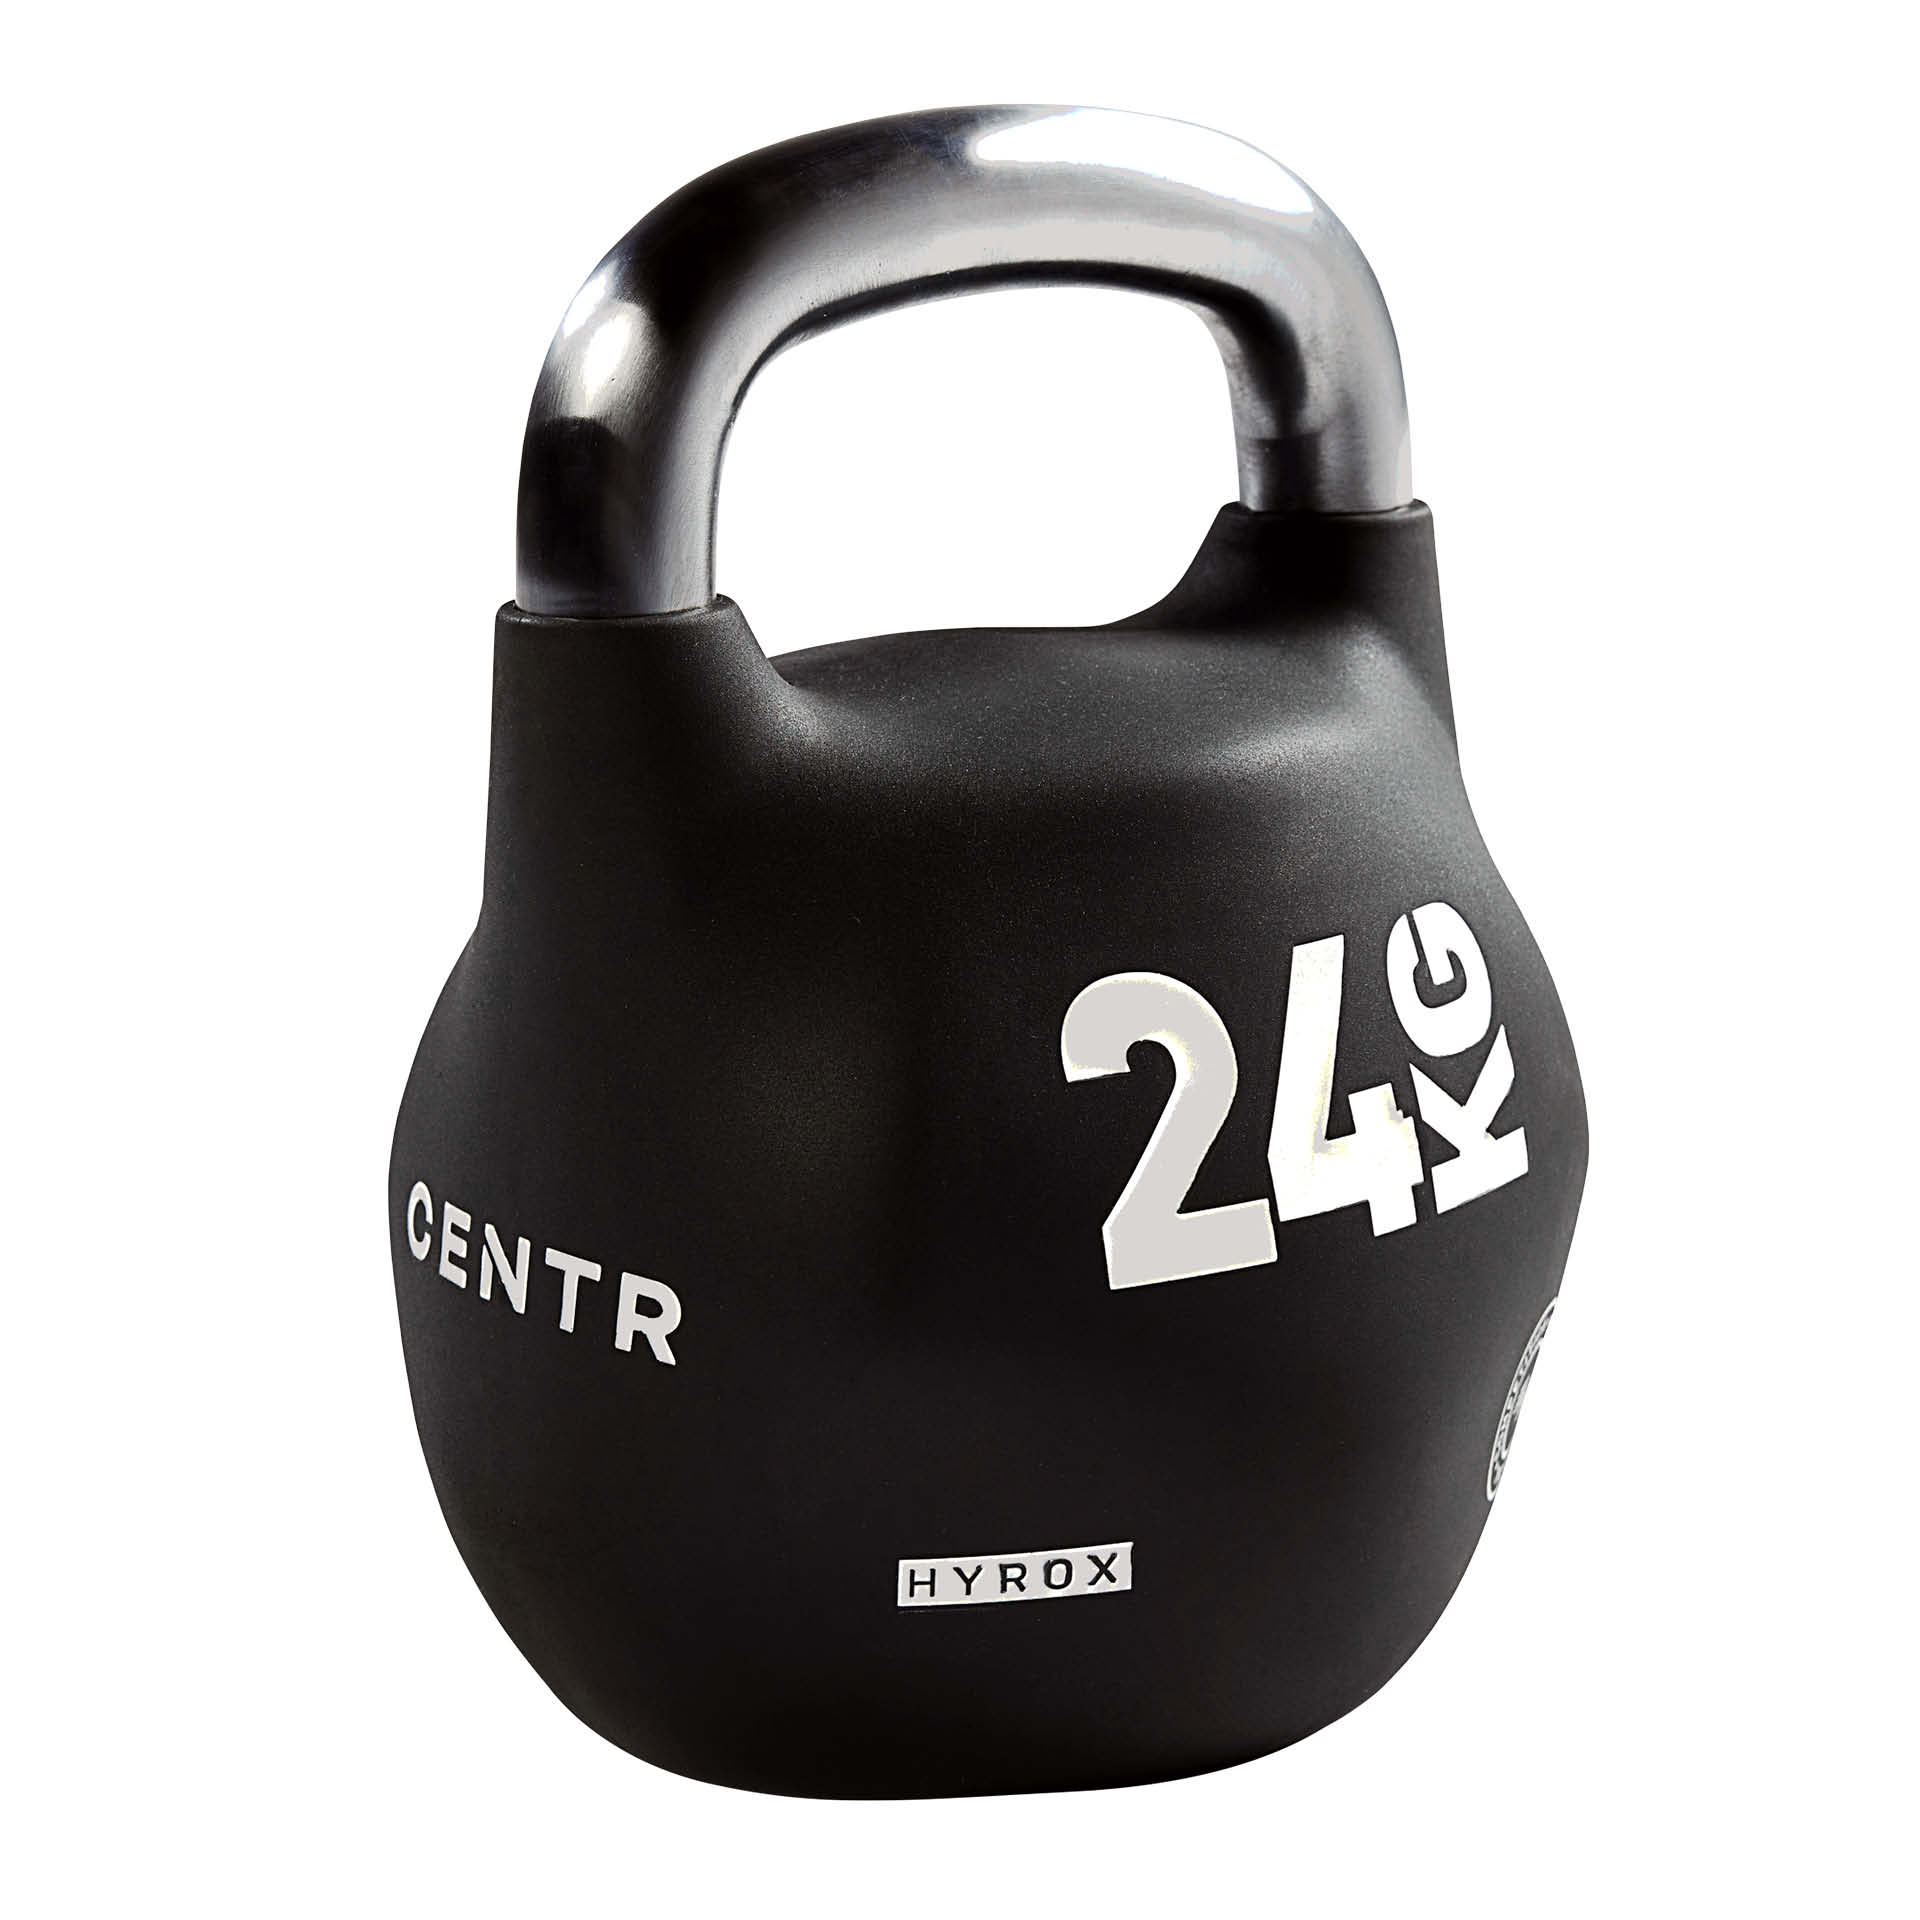 CENTR x HYROX Competition Octo Kettlebell